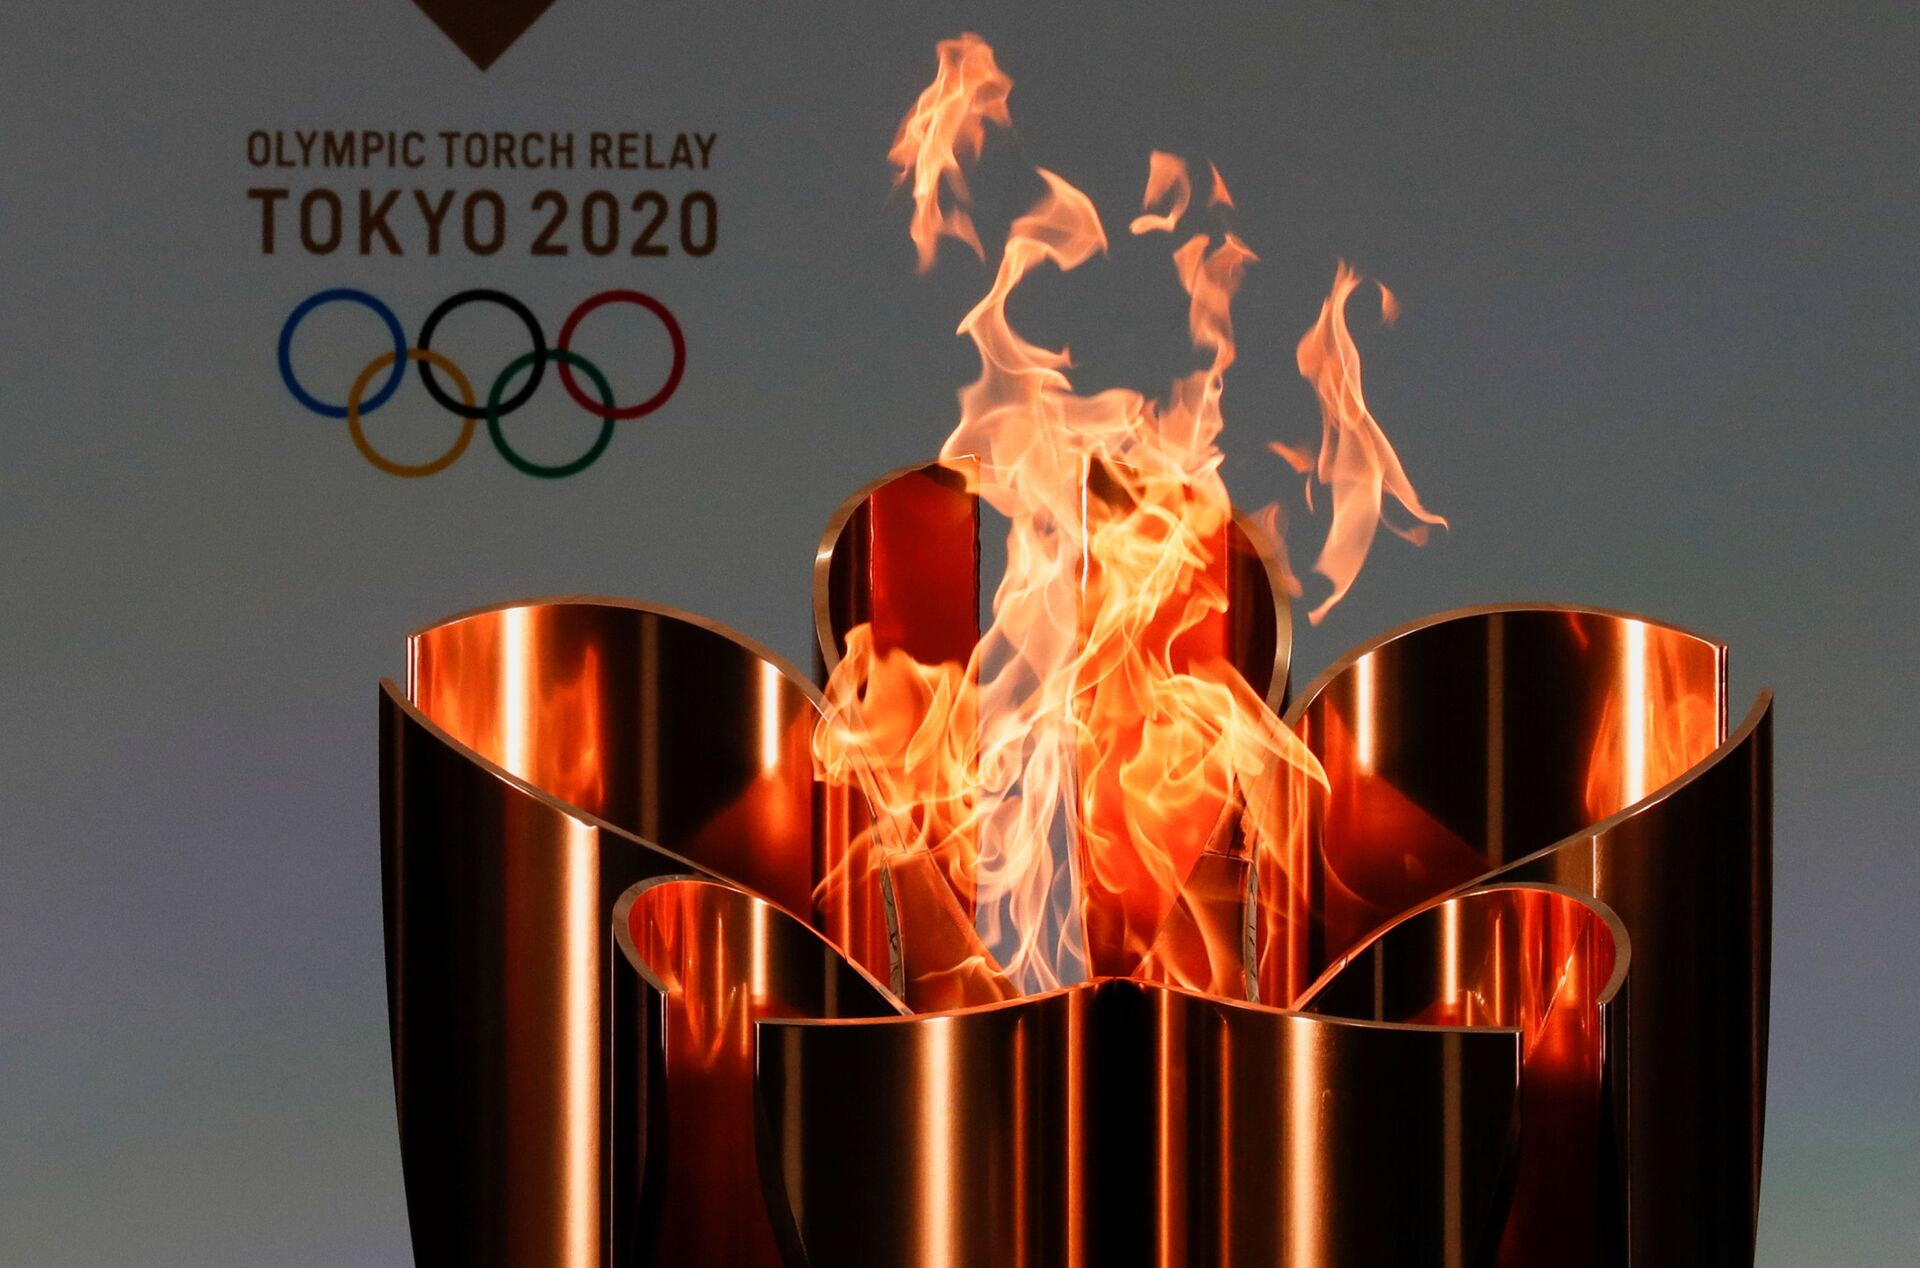 Olympic Torch Goes Out Second Day in Row During Japan Relay, Reports Say - Sputnik International, 1920, 26.03.2021